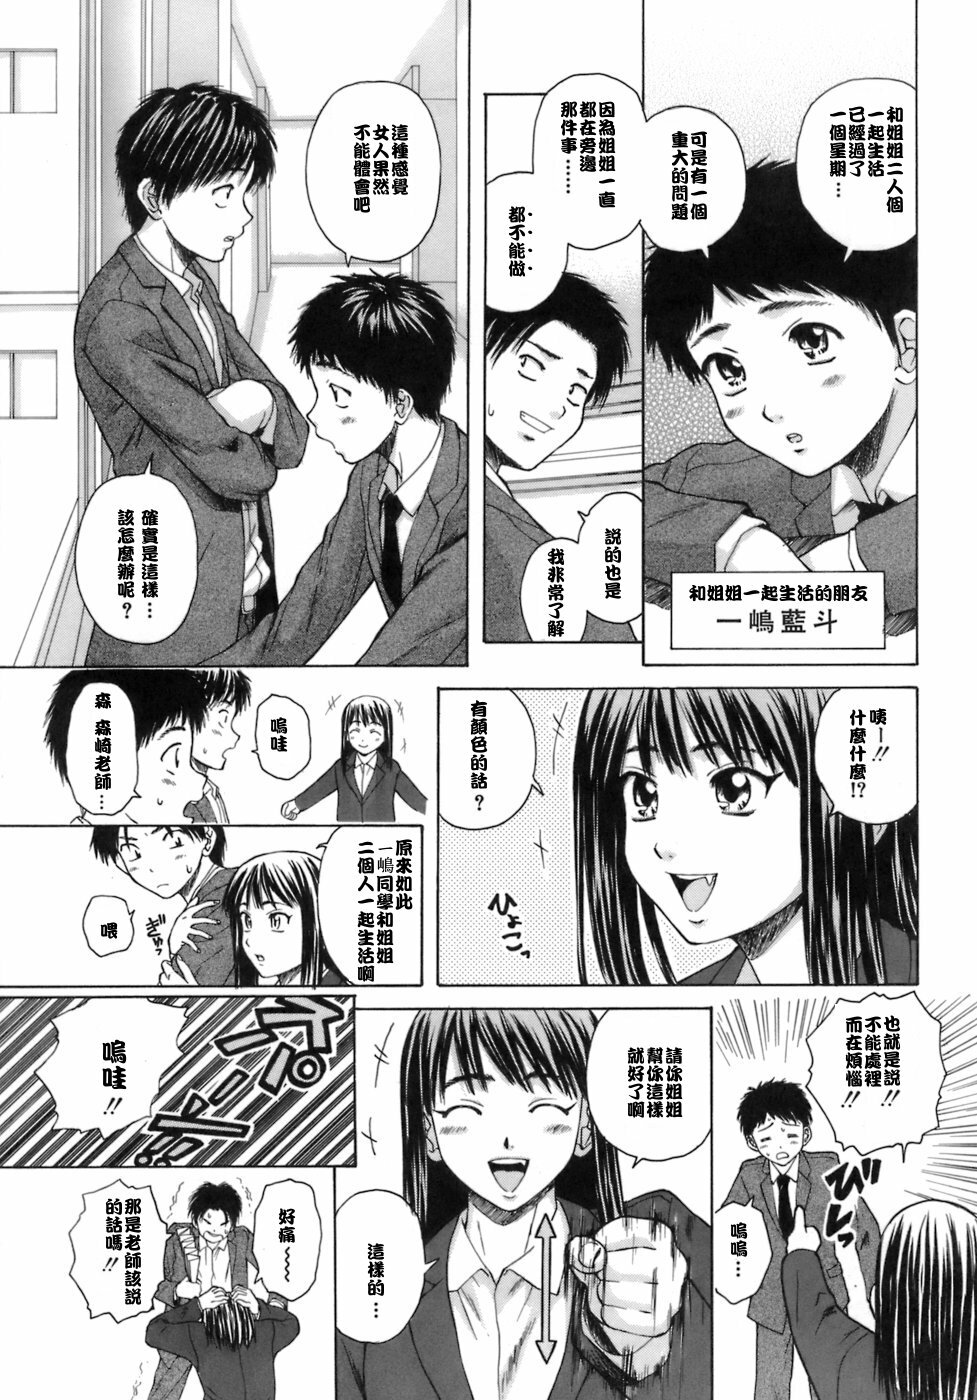 [Fuuga] Kyoushi to Seito to - Teacher and Student [Chinese] [悠月工房] page 20 full